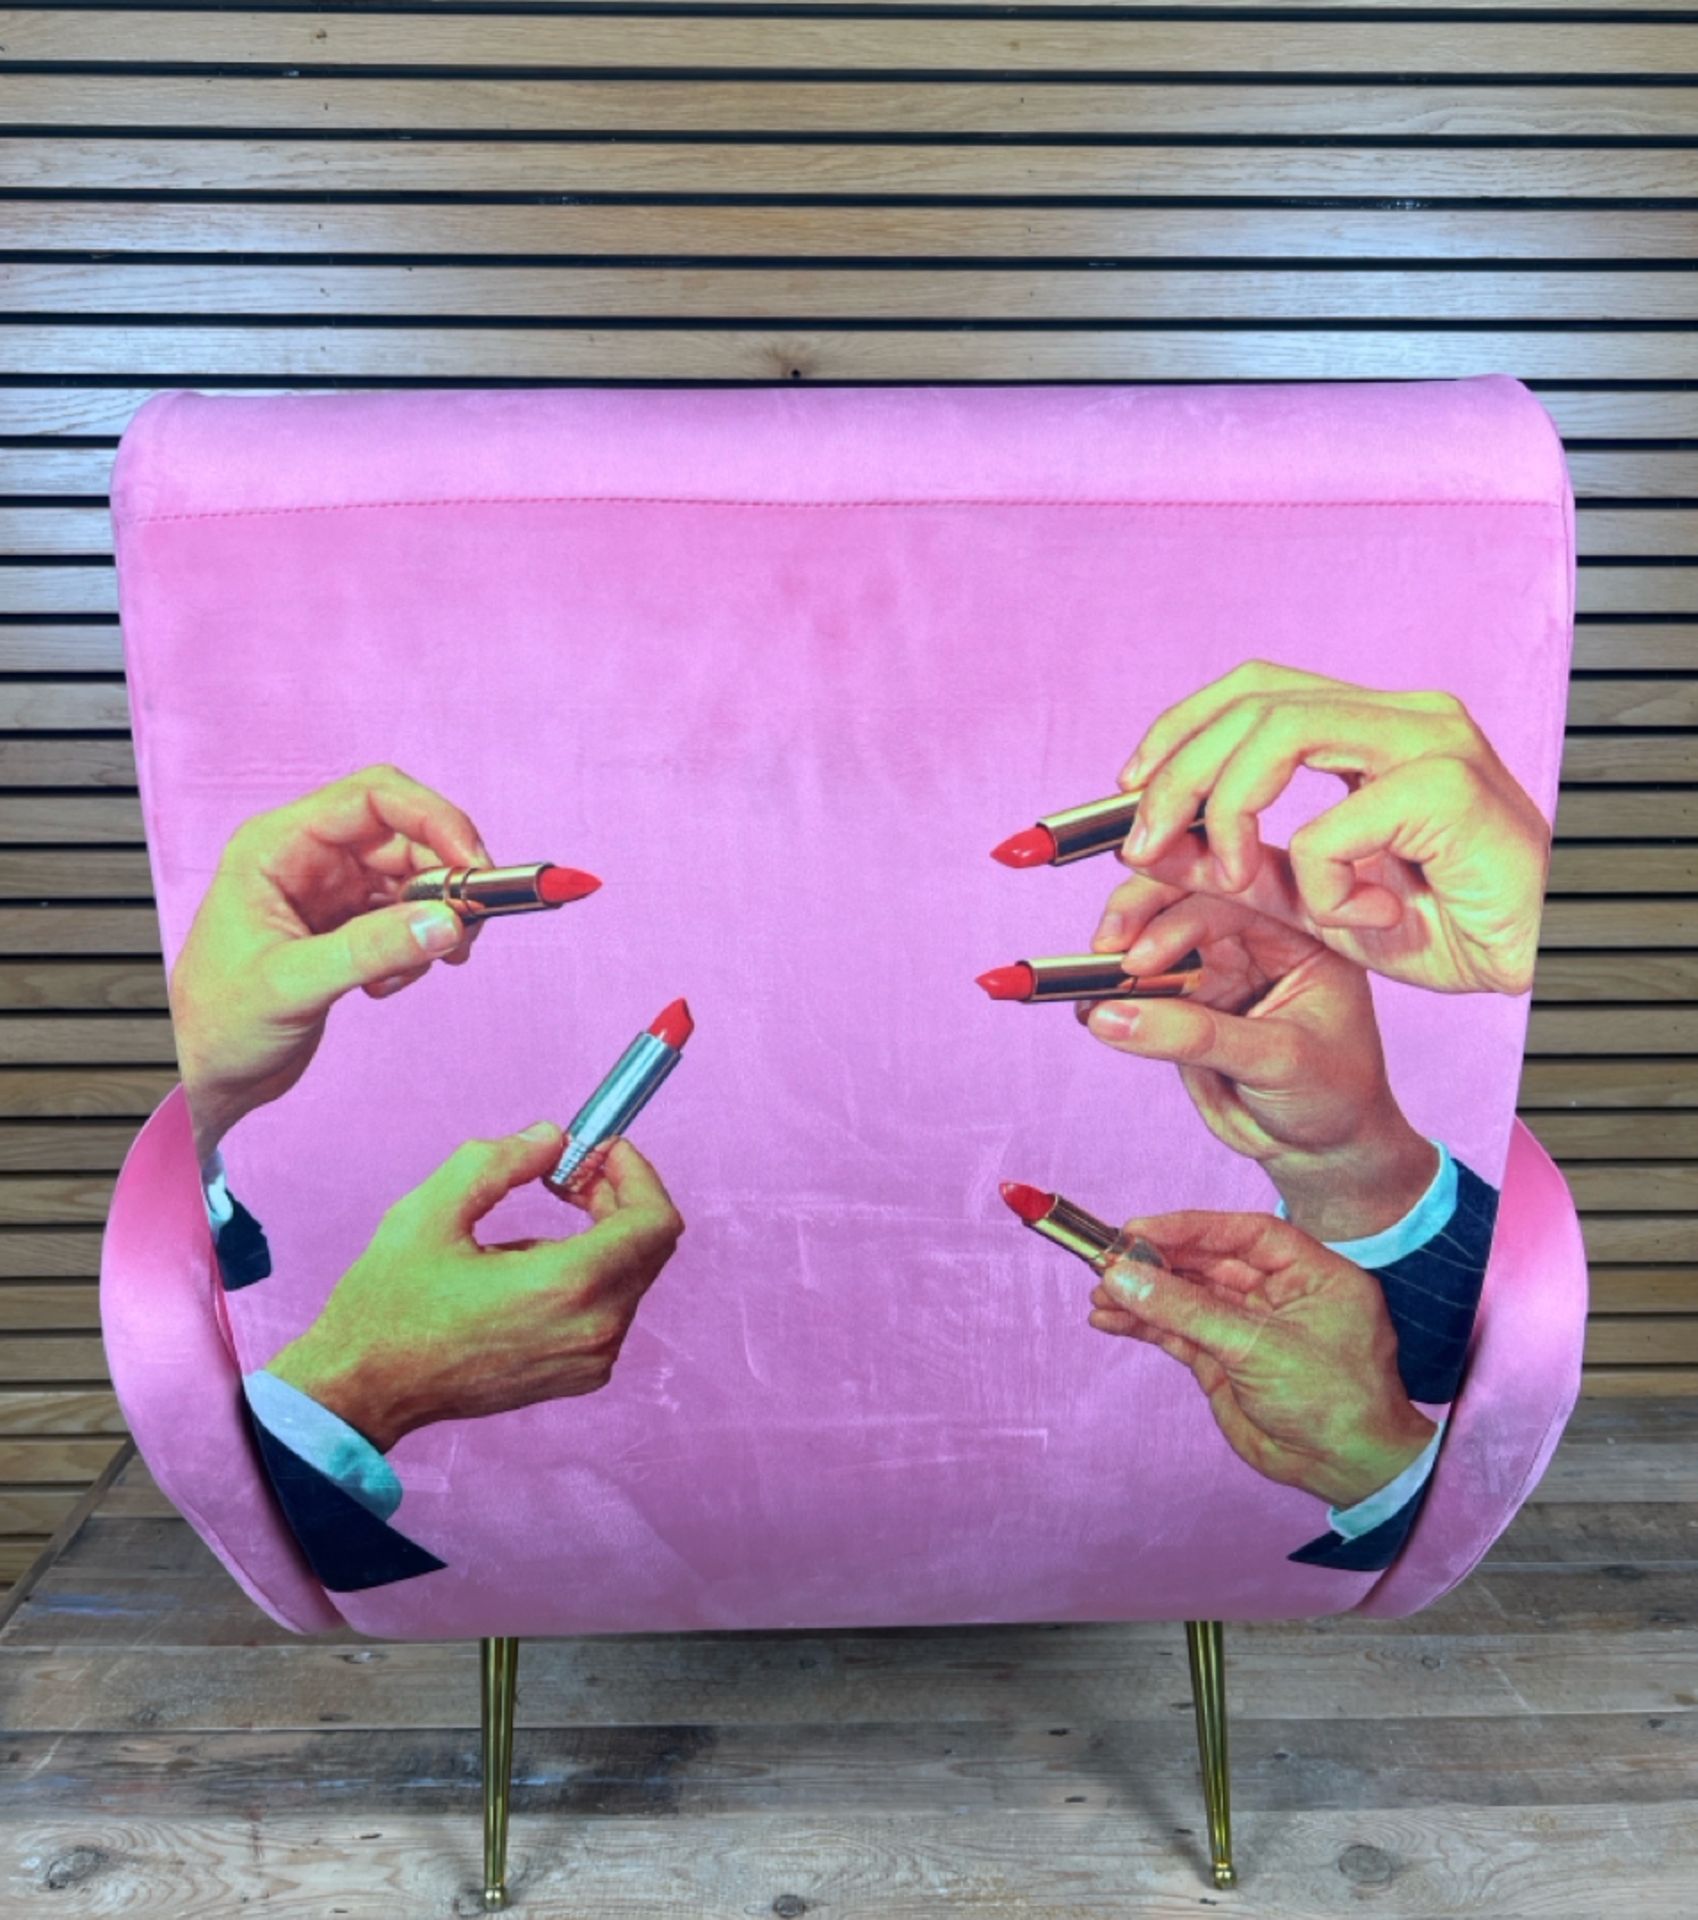 Seletti Wears Toilet Paper Upholstered Wooden Armchair in Pink With Lipstick Design - Image 4 of 4